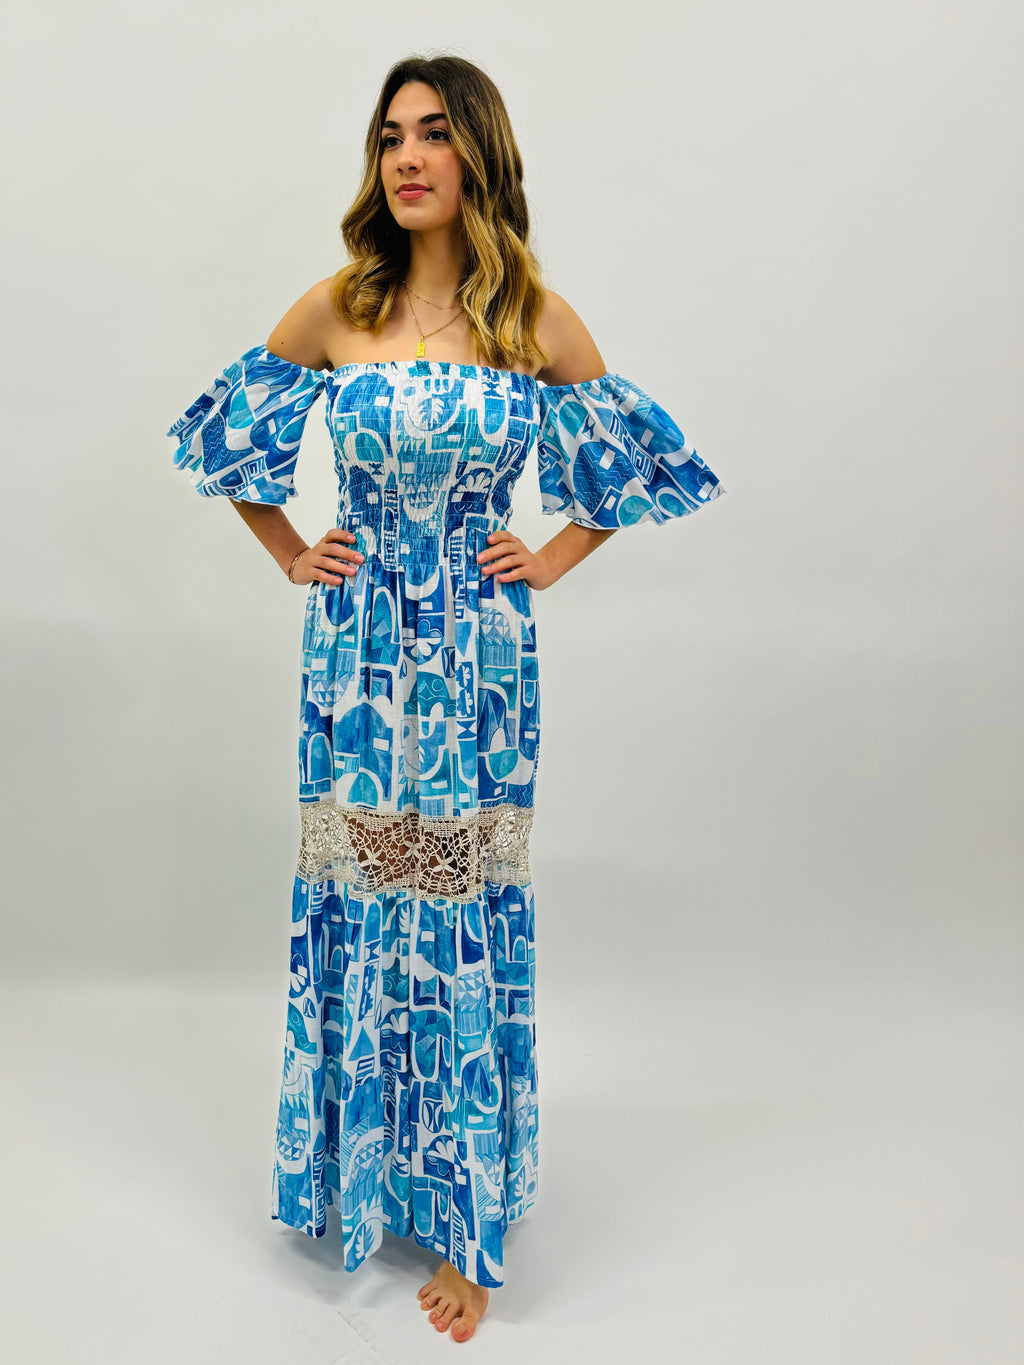 DRESS NINNI LINEN PRINTED AND LACE BLUE HOUSES